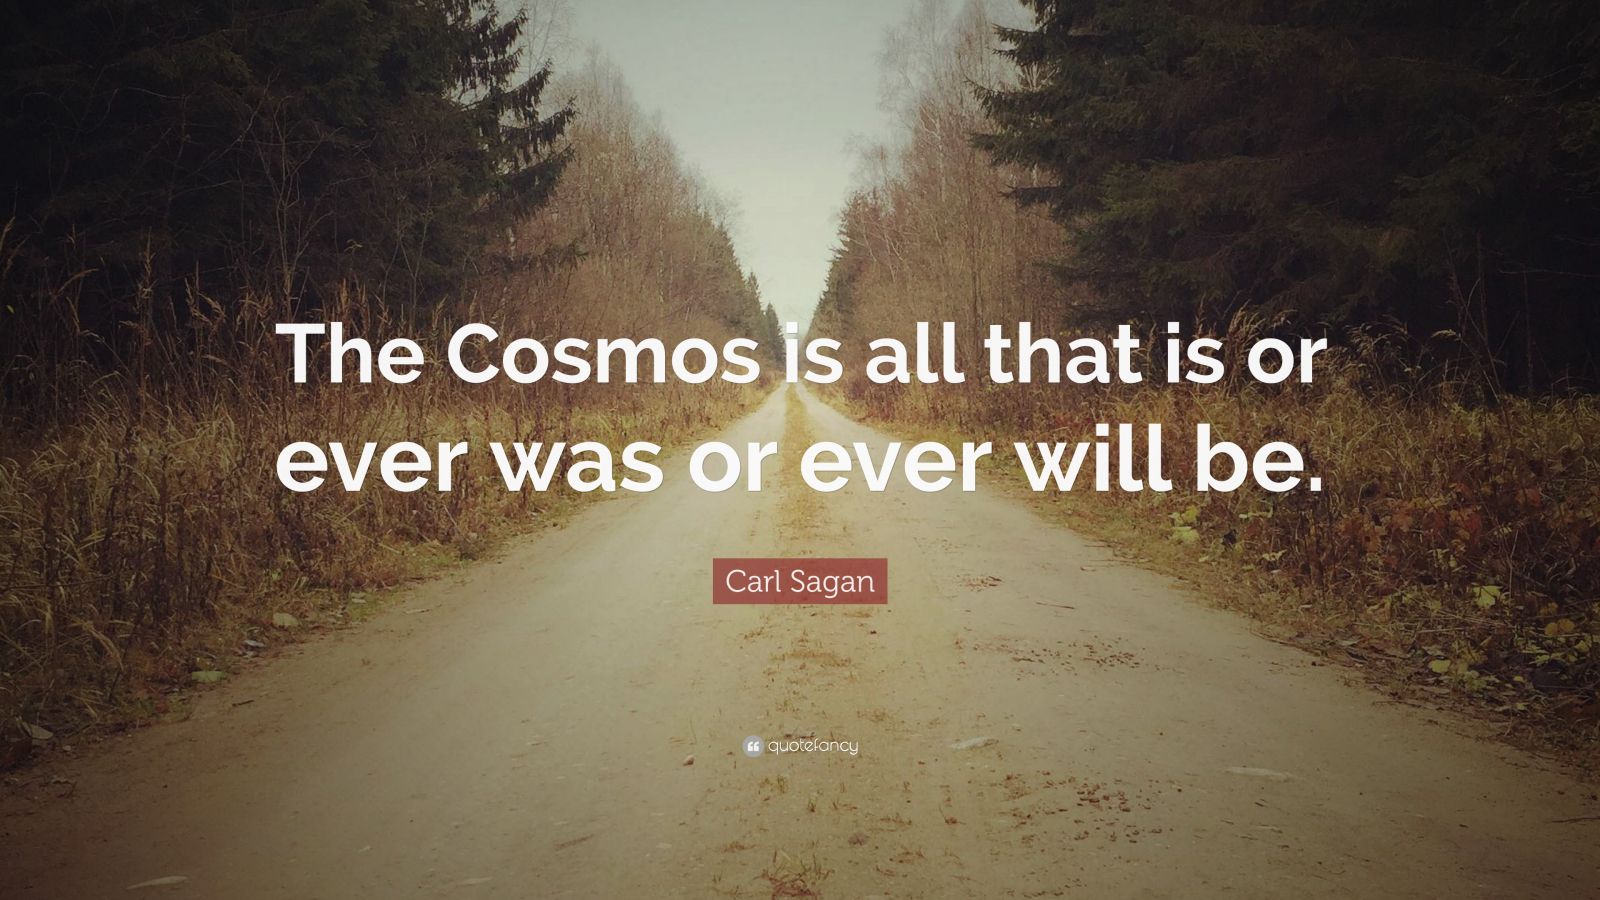 Carl Sagan Quote: “The Cosmos is all that is or ever was or ever will ...